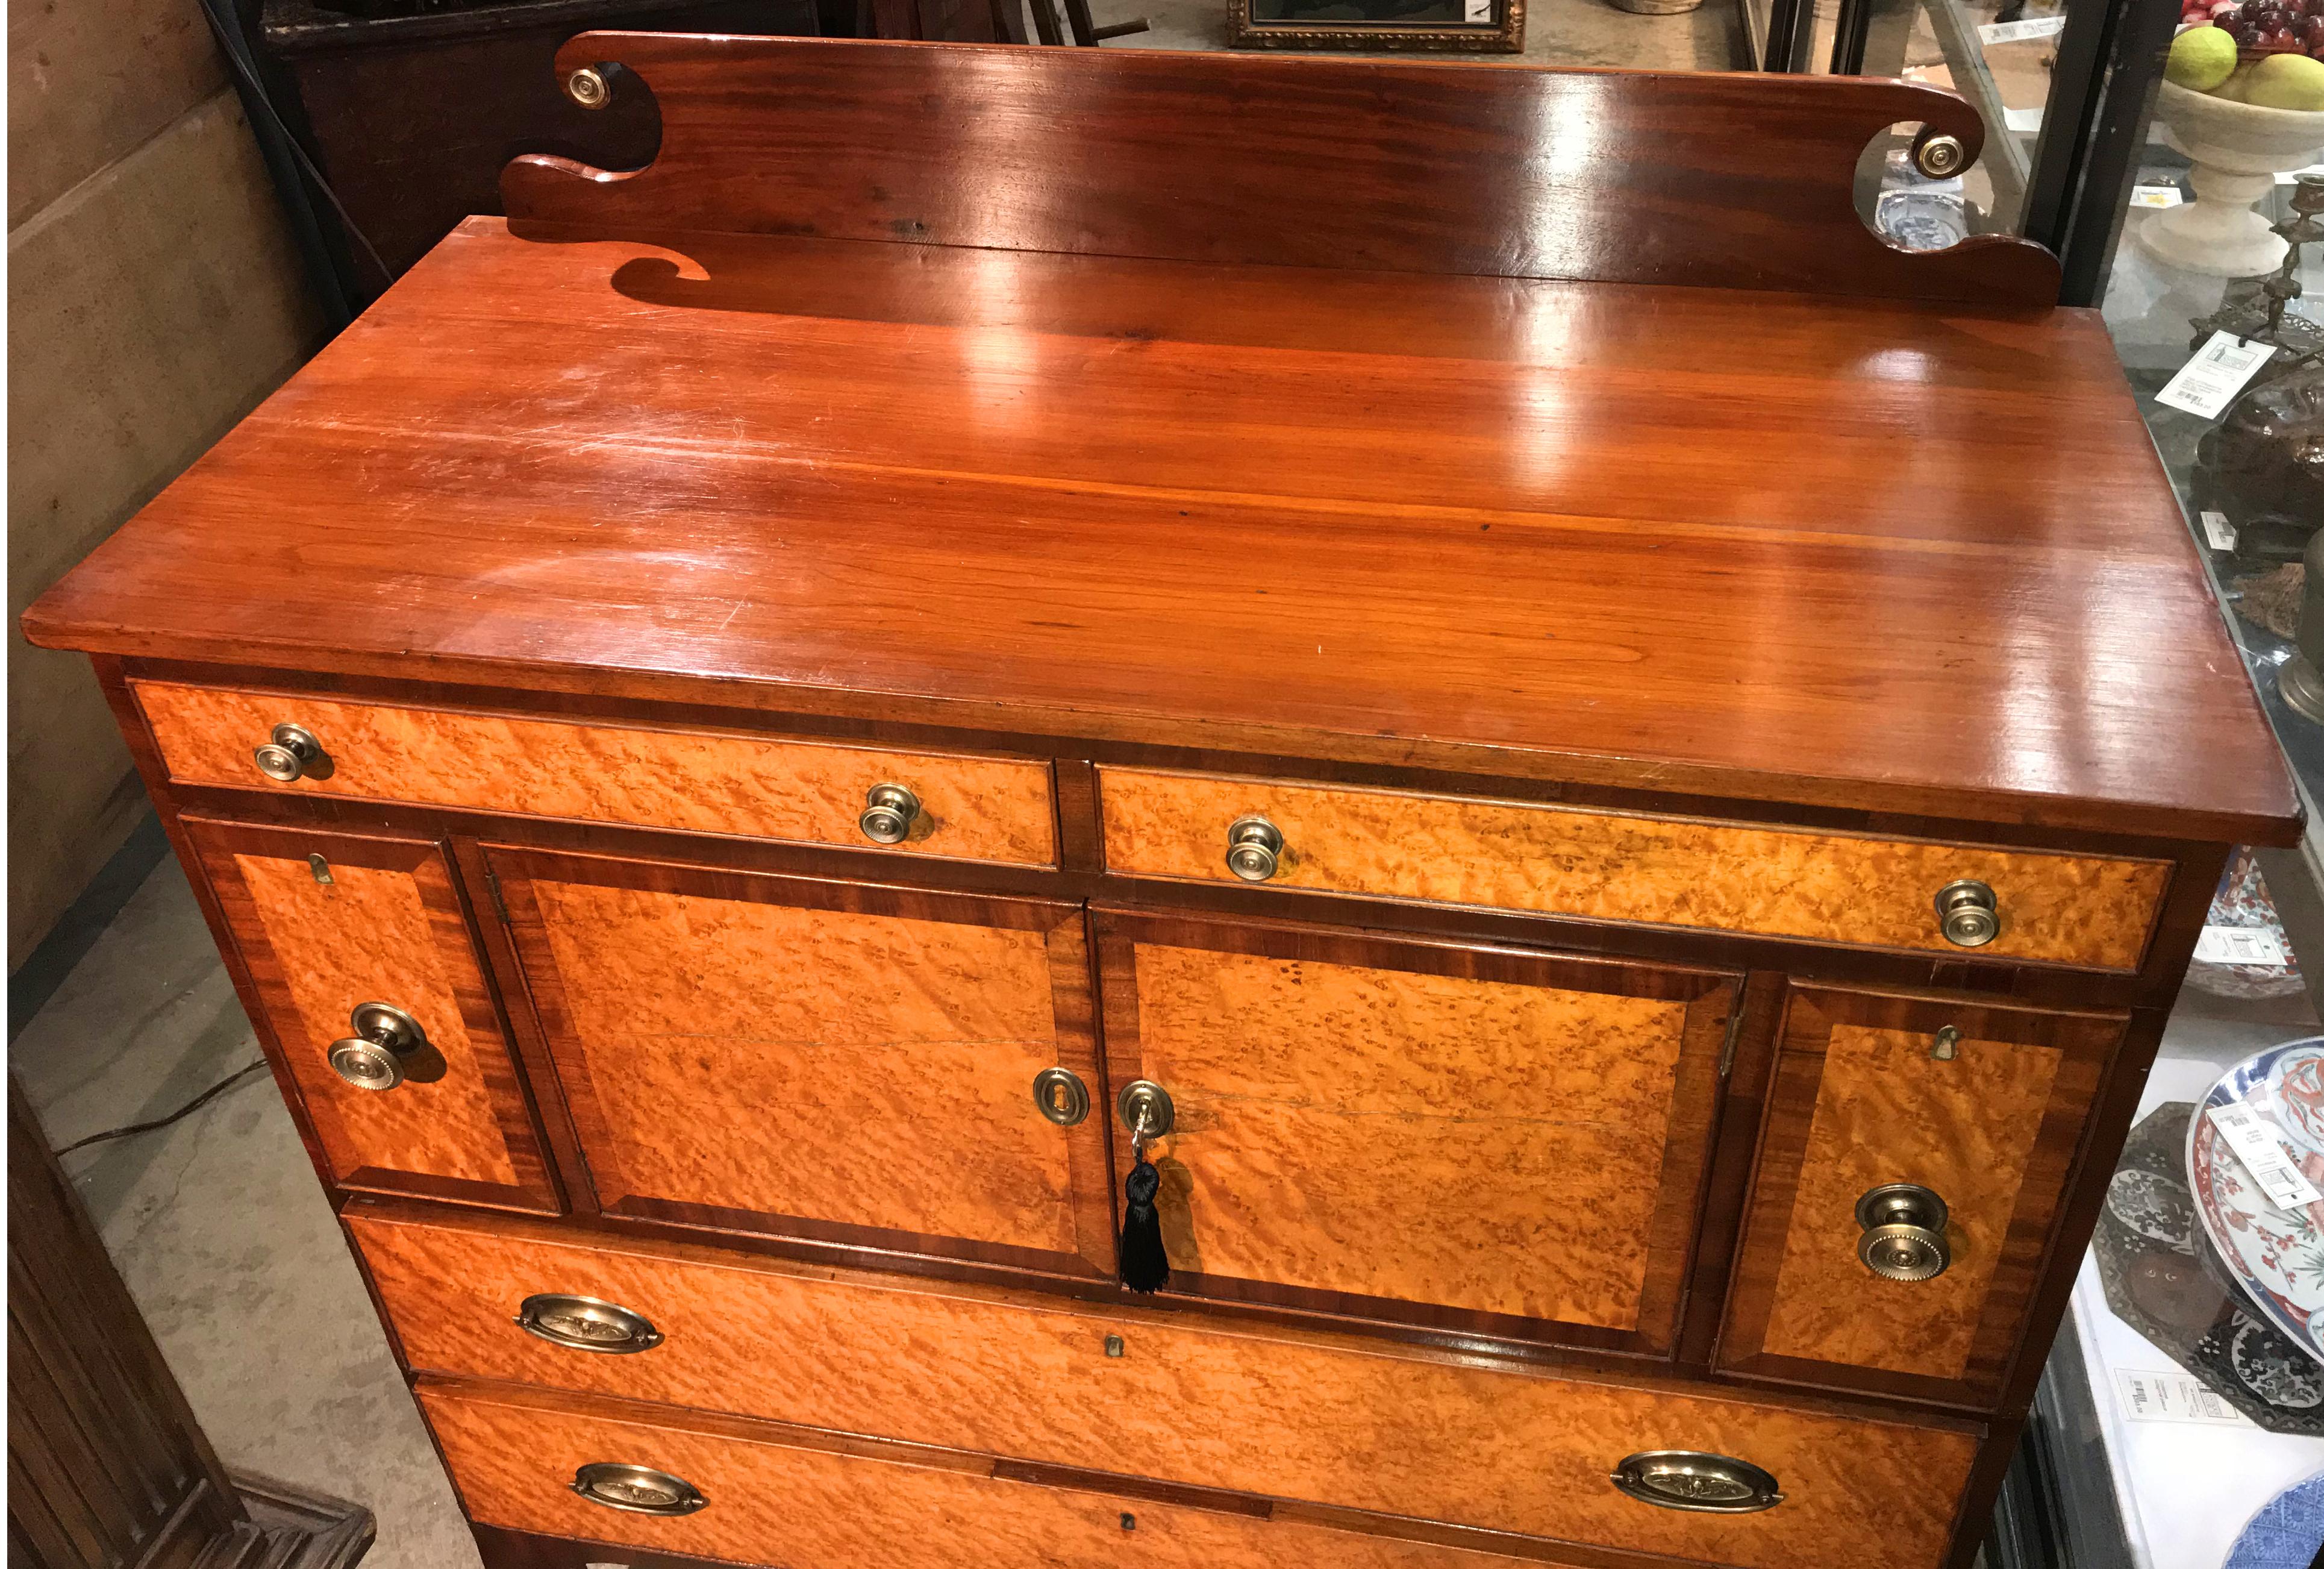 A fine example of a Federal cherry server or sideboard with rectangular top, shaped backsplash with brass bulls eyes, surmounting two fitted frieze drawers over a two-door central storage compartment, flanked by two bottle drawers, over two long